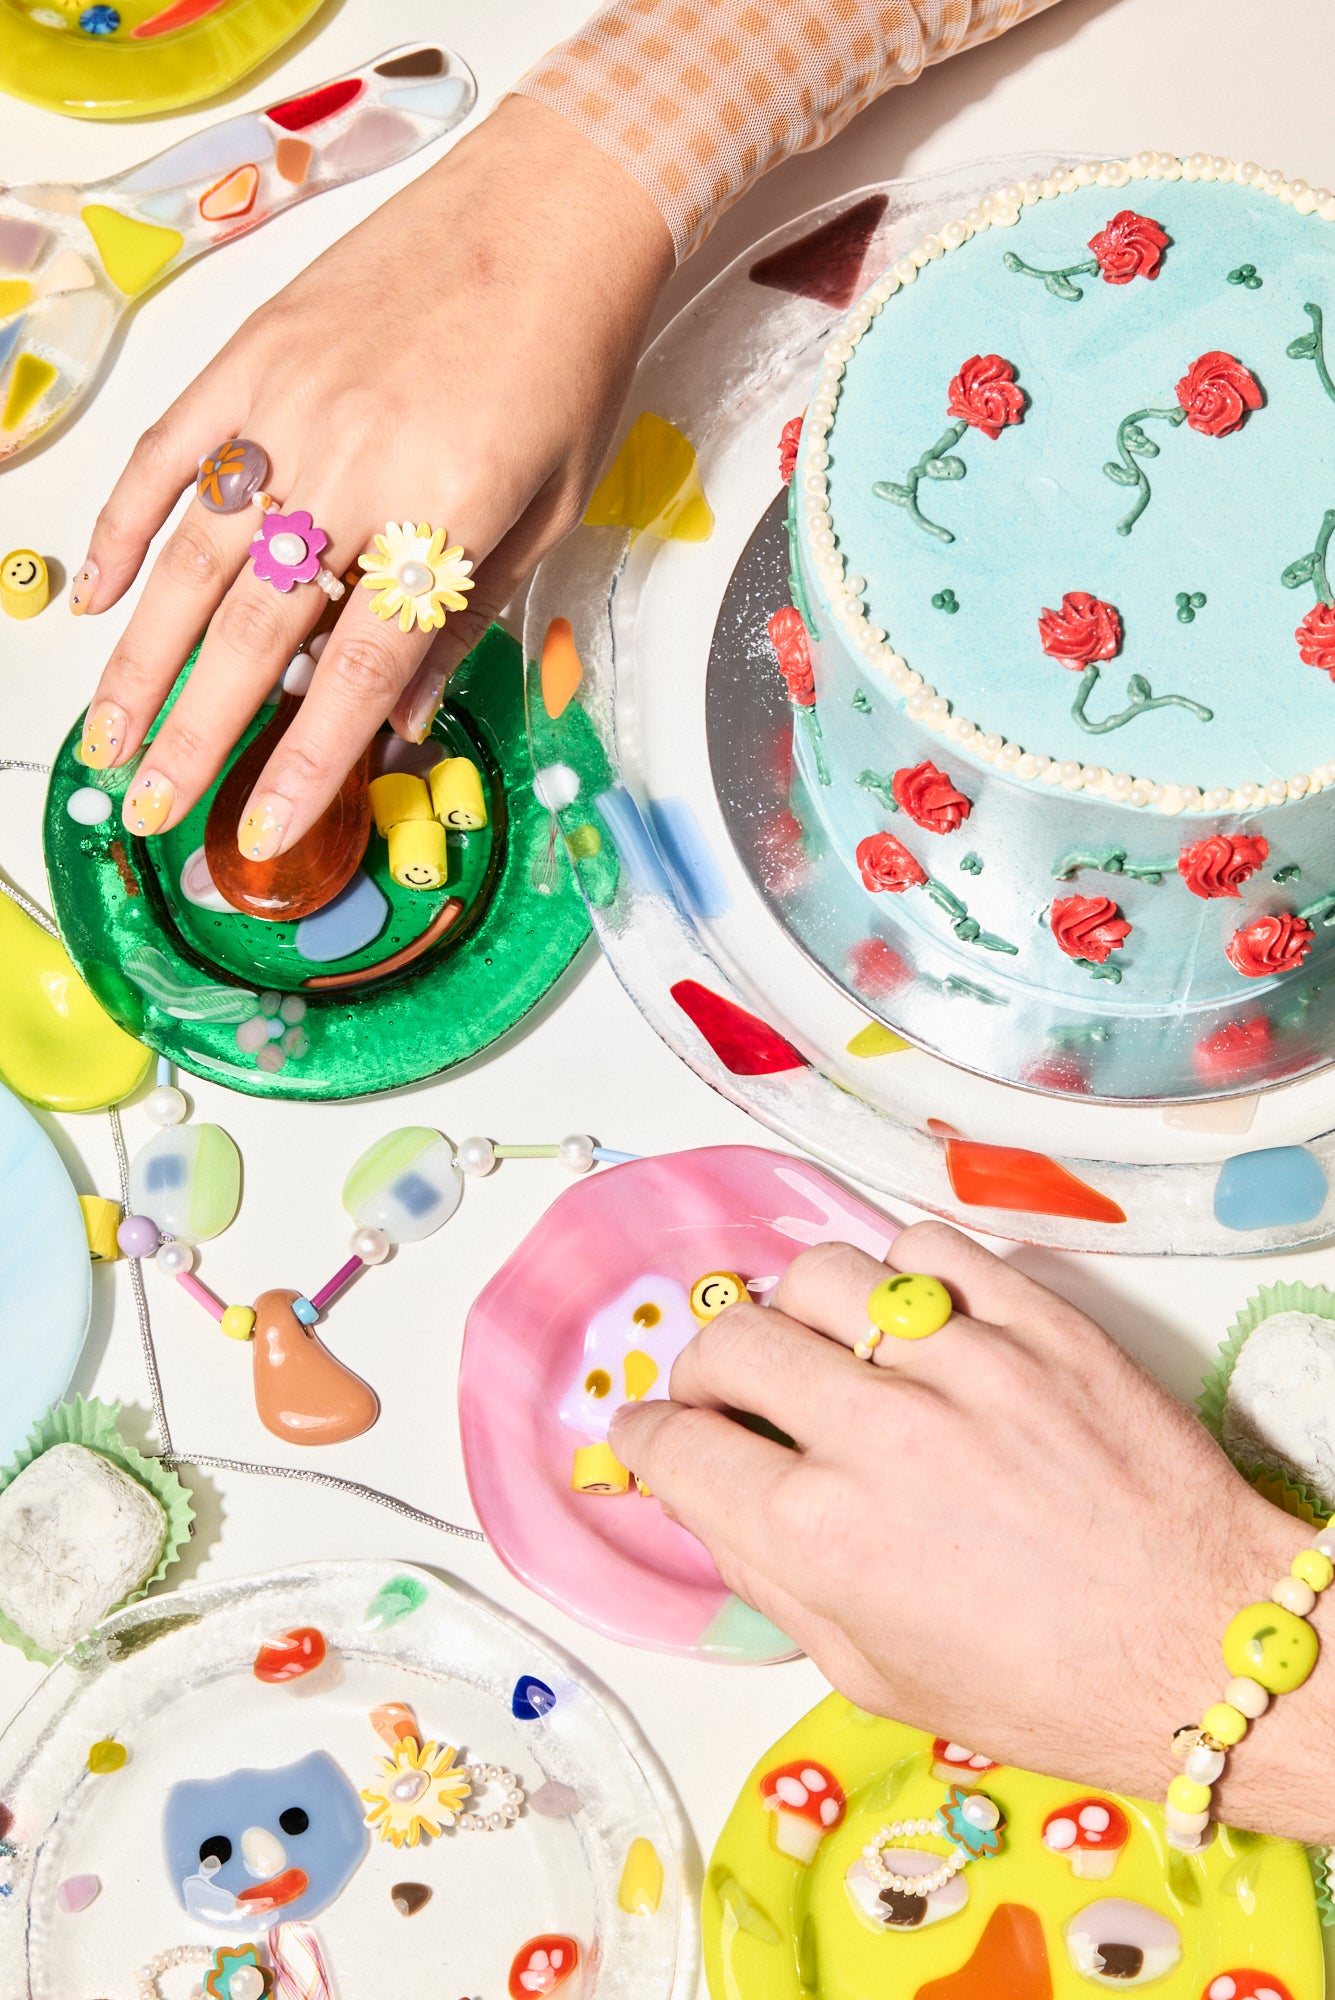 Tablescape of Models Hands Wearing Jewellery Bianca Mavrick x Lawn Bowls Daisy Pearl Glass Ring